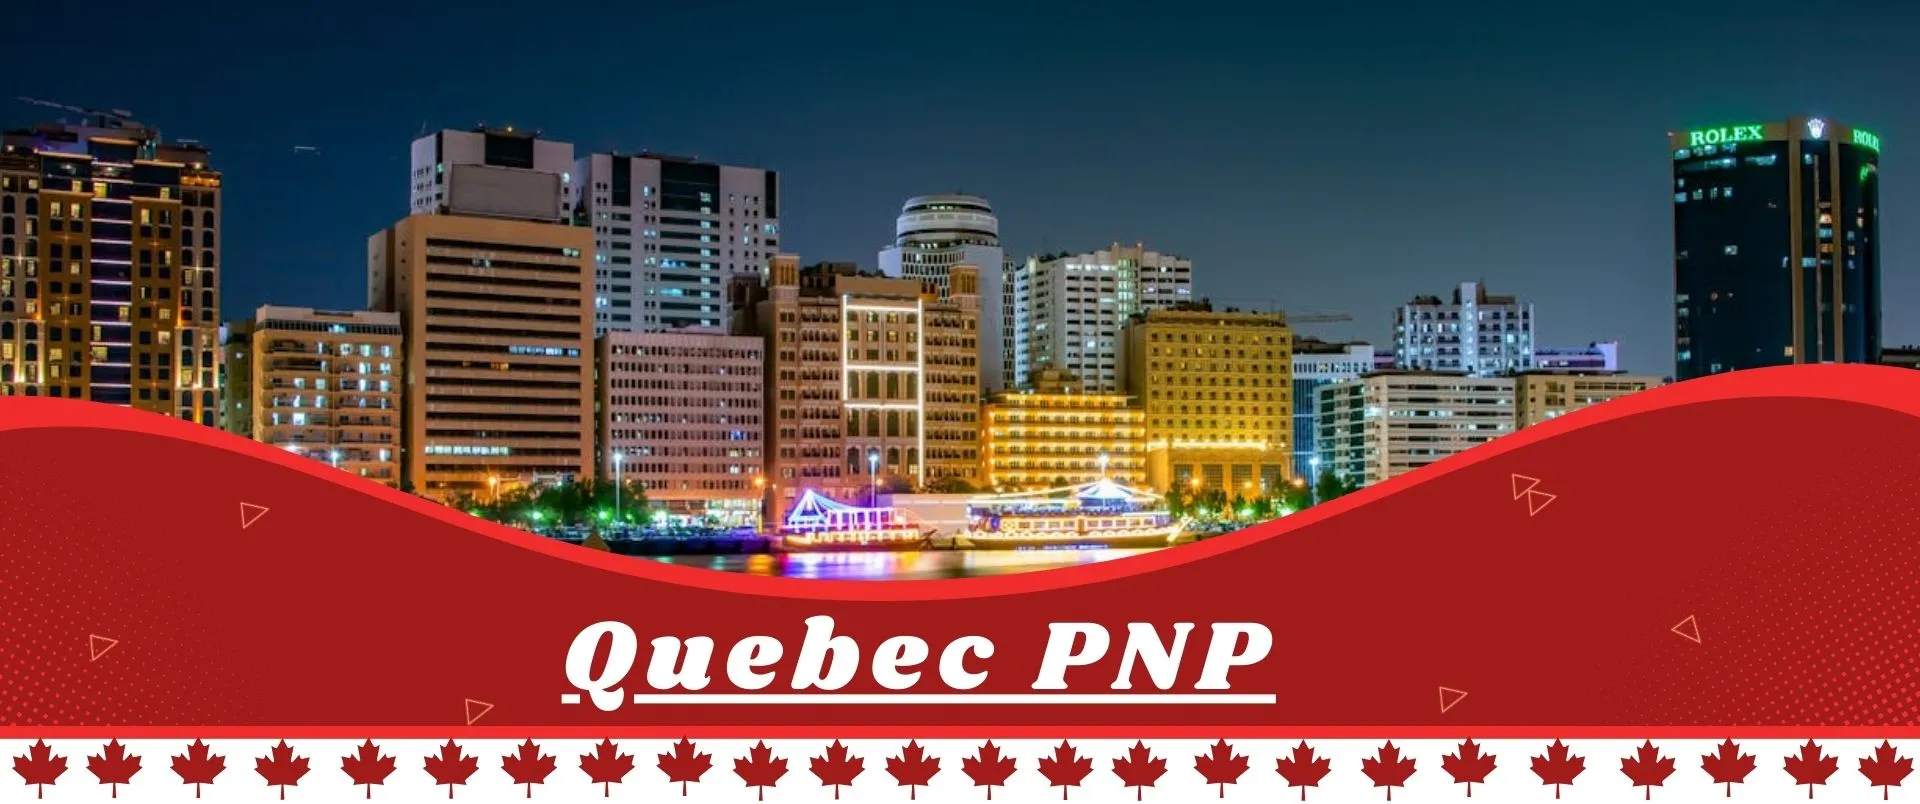 Quebec PNP Buildings with bridge in night time designed by isha immigration